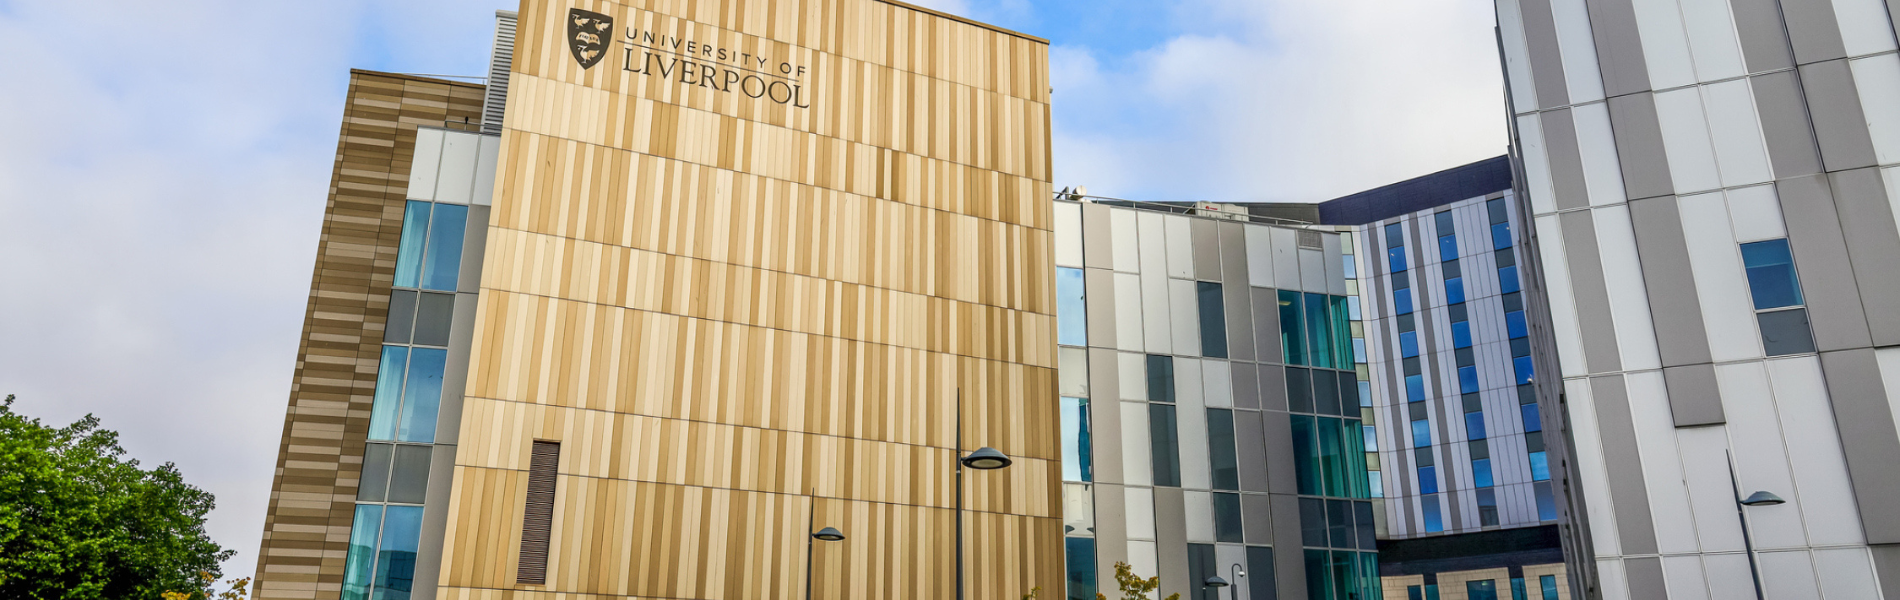 NIFES Wins Contract to Deliver Building Safety Case Solutions to the University of Liverpool